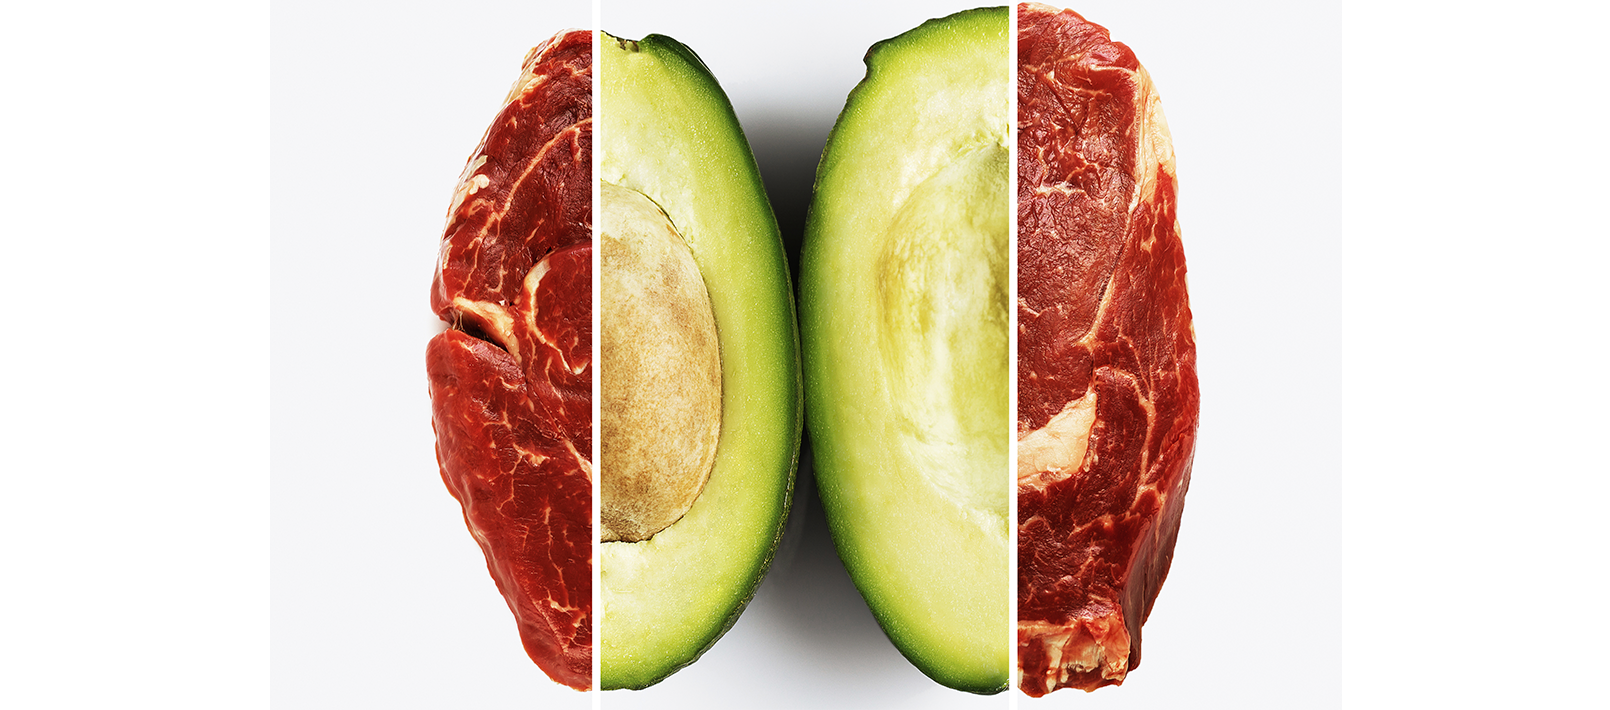 Slice of avocado and piece of beef on white background.